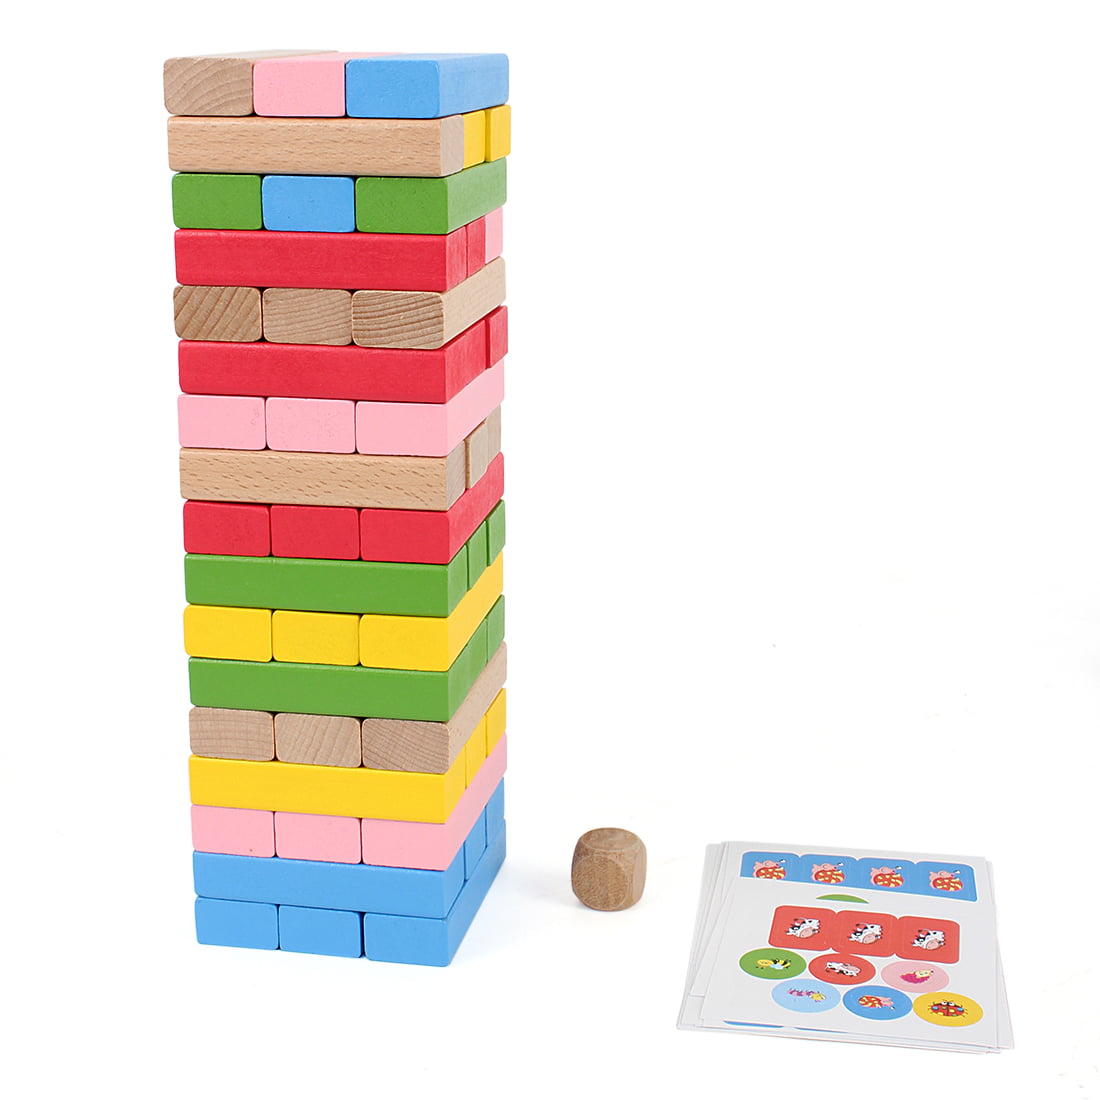 Wooden Tumble Tower